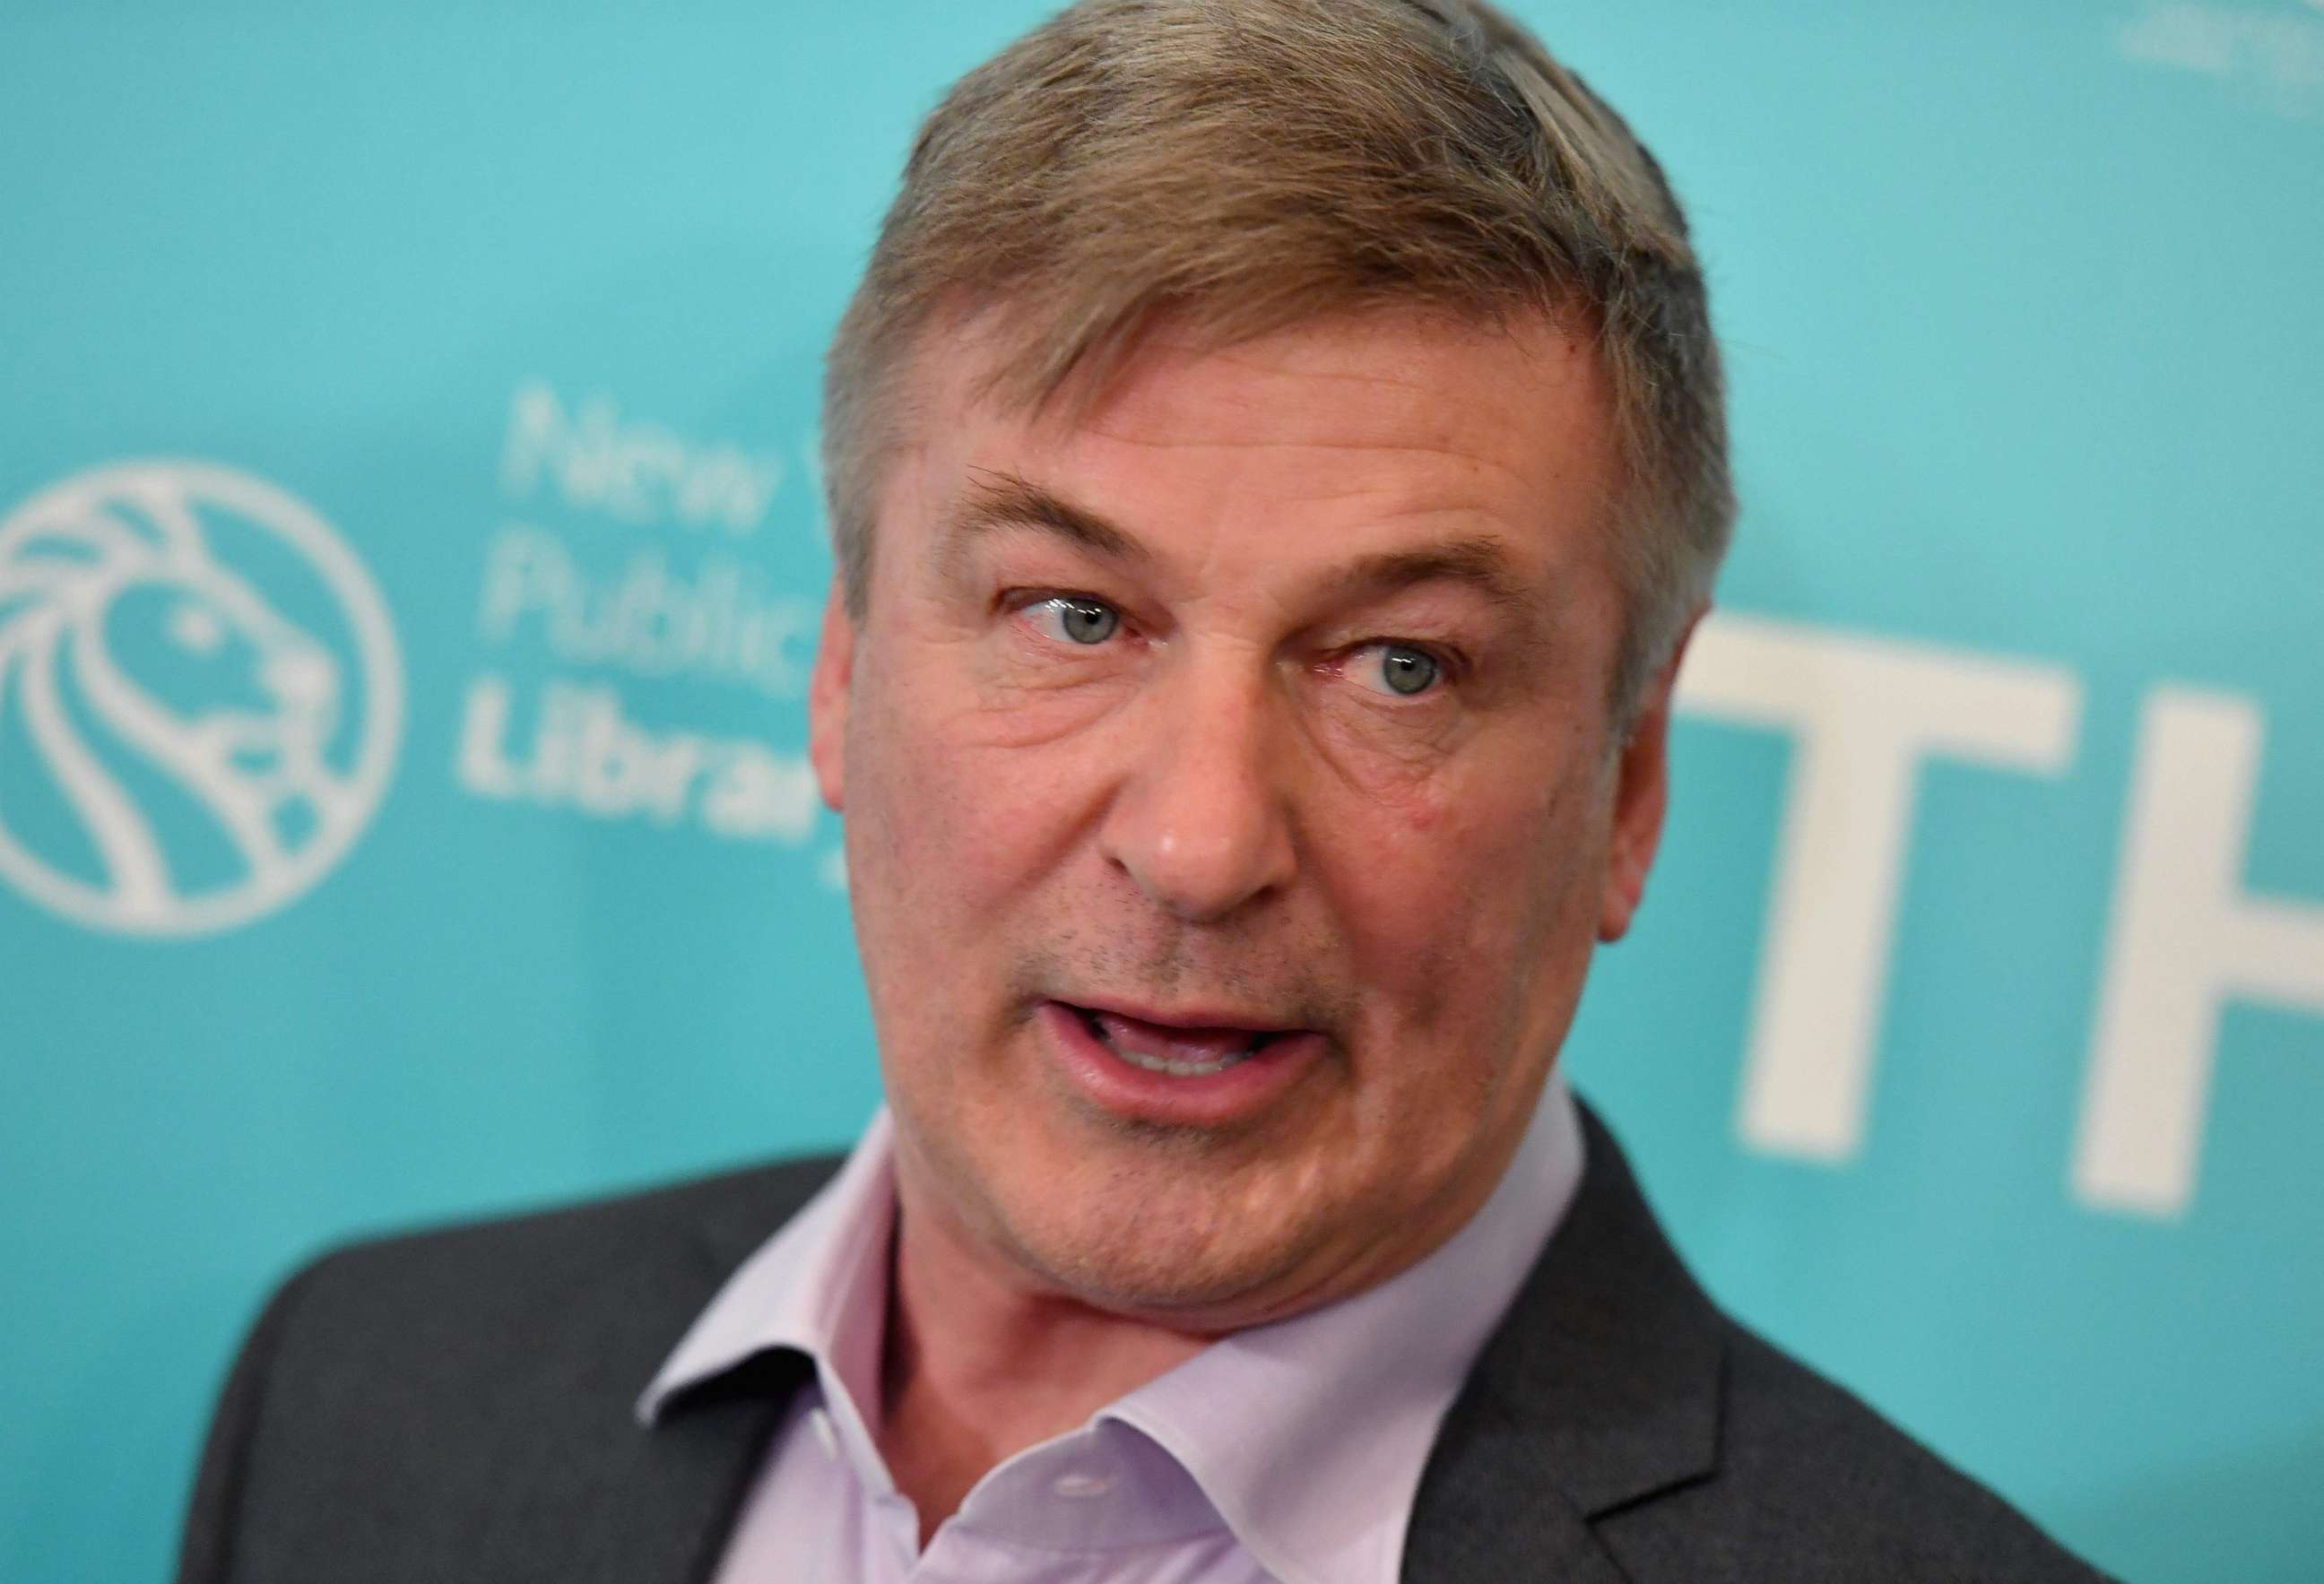 PHOTO: In this file photo taken on April 1, 2019, actor Alec Baldwin attends the premiere of "The Public" at New York Public Library in New York City.